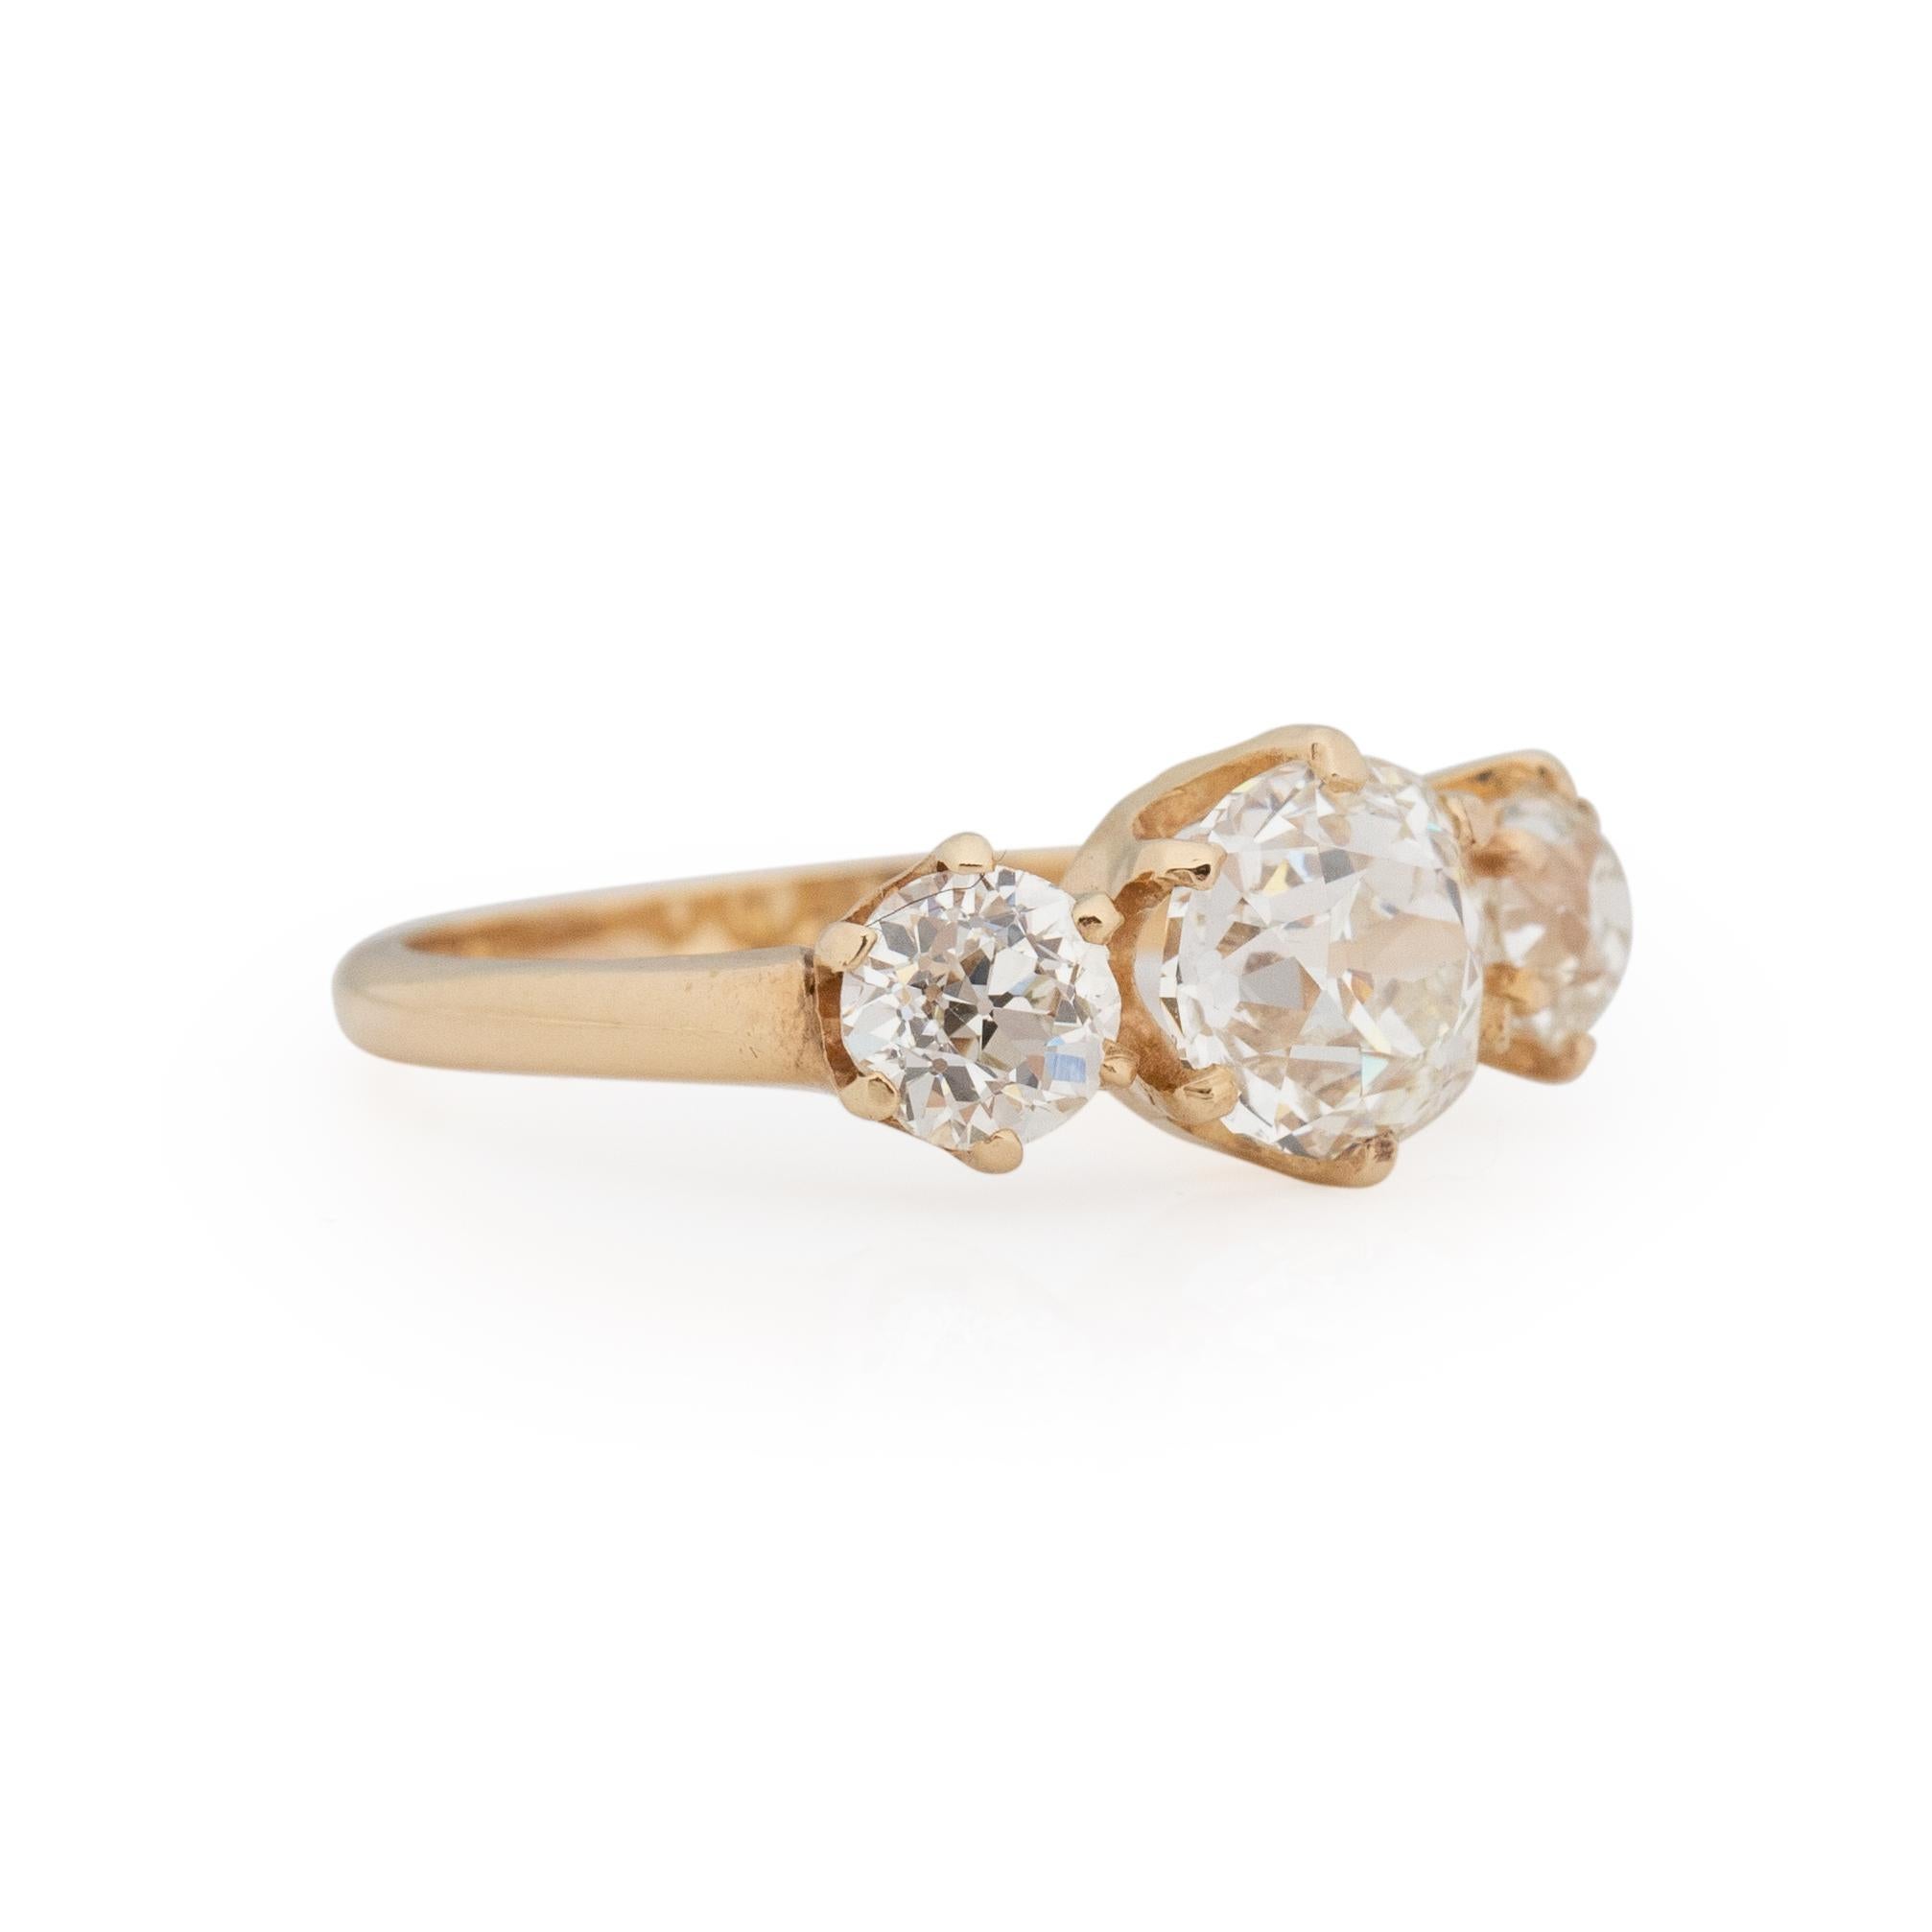 This three stone Victorian engagement ring is OUTSTANDING! Everything about this piece works flawlessly together to give a breathtaking, eye catching piece. Crafted in 14K yellow gold this strait shanked design is perfect in holding up three large